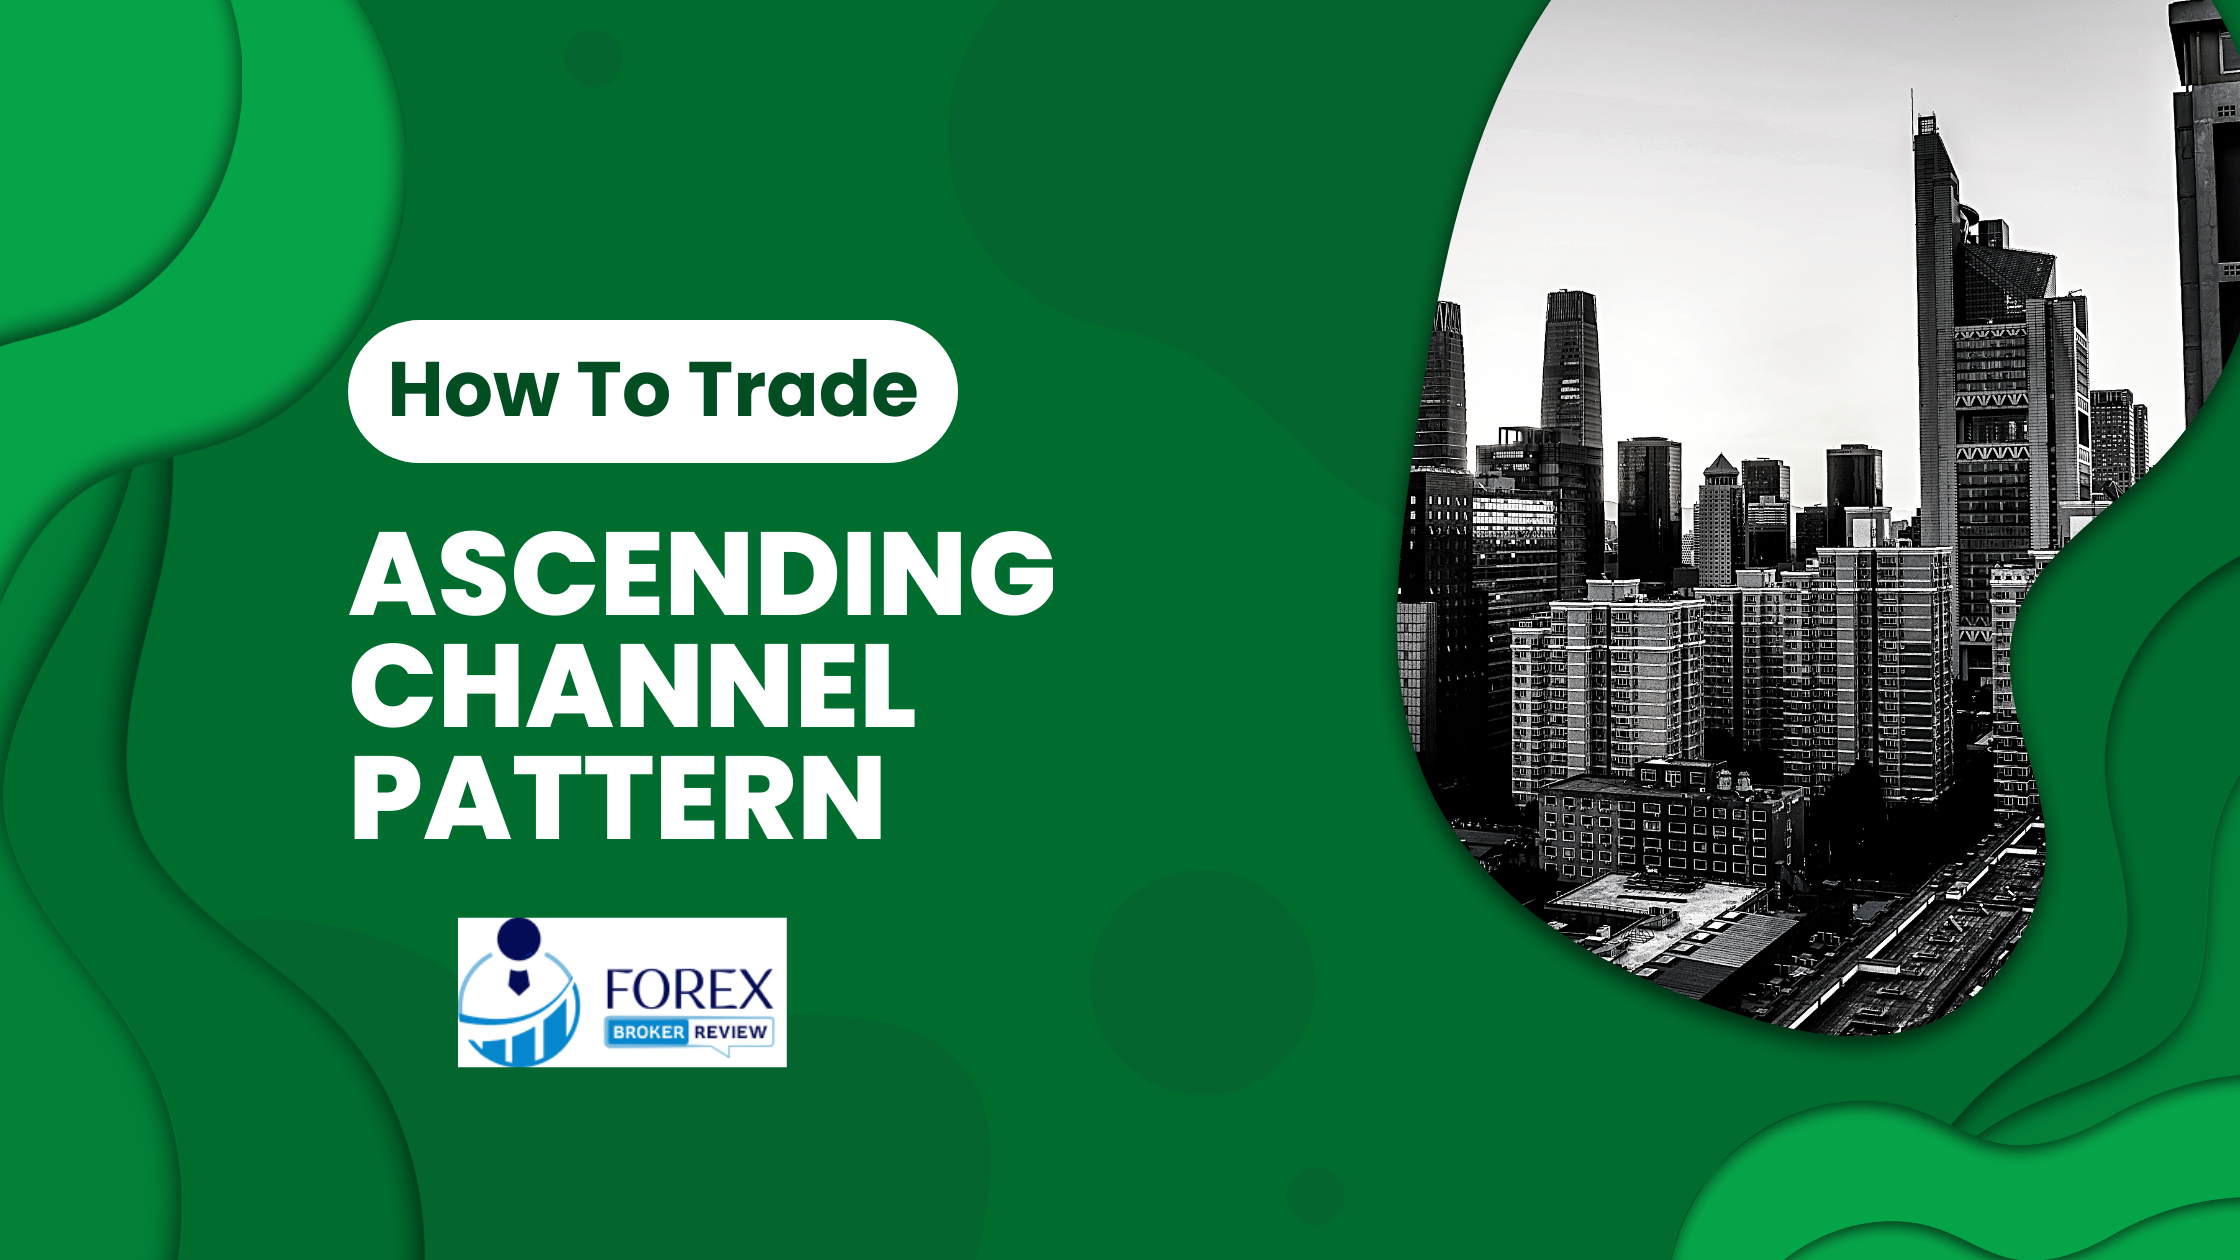 How To Trade An Ascending Channel Pattern